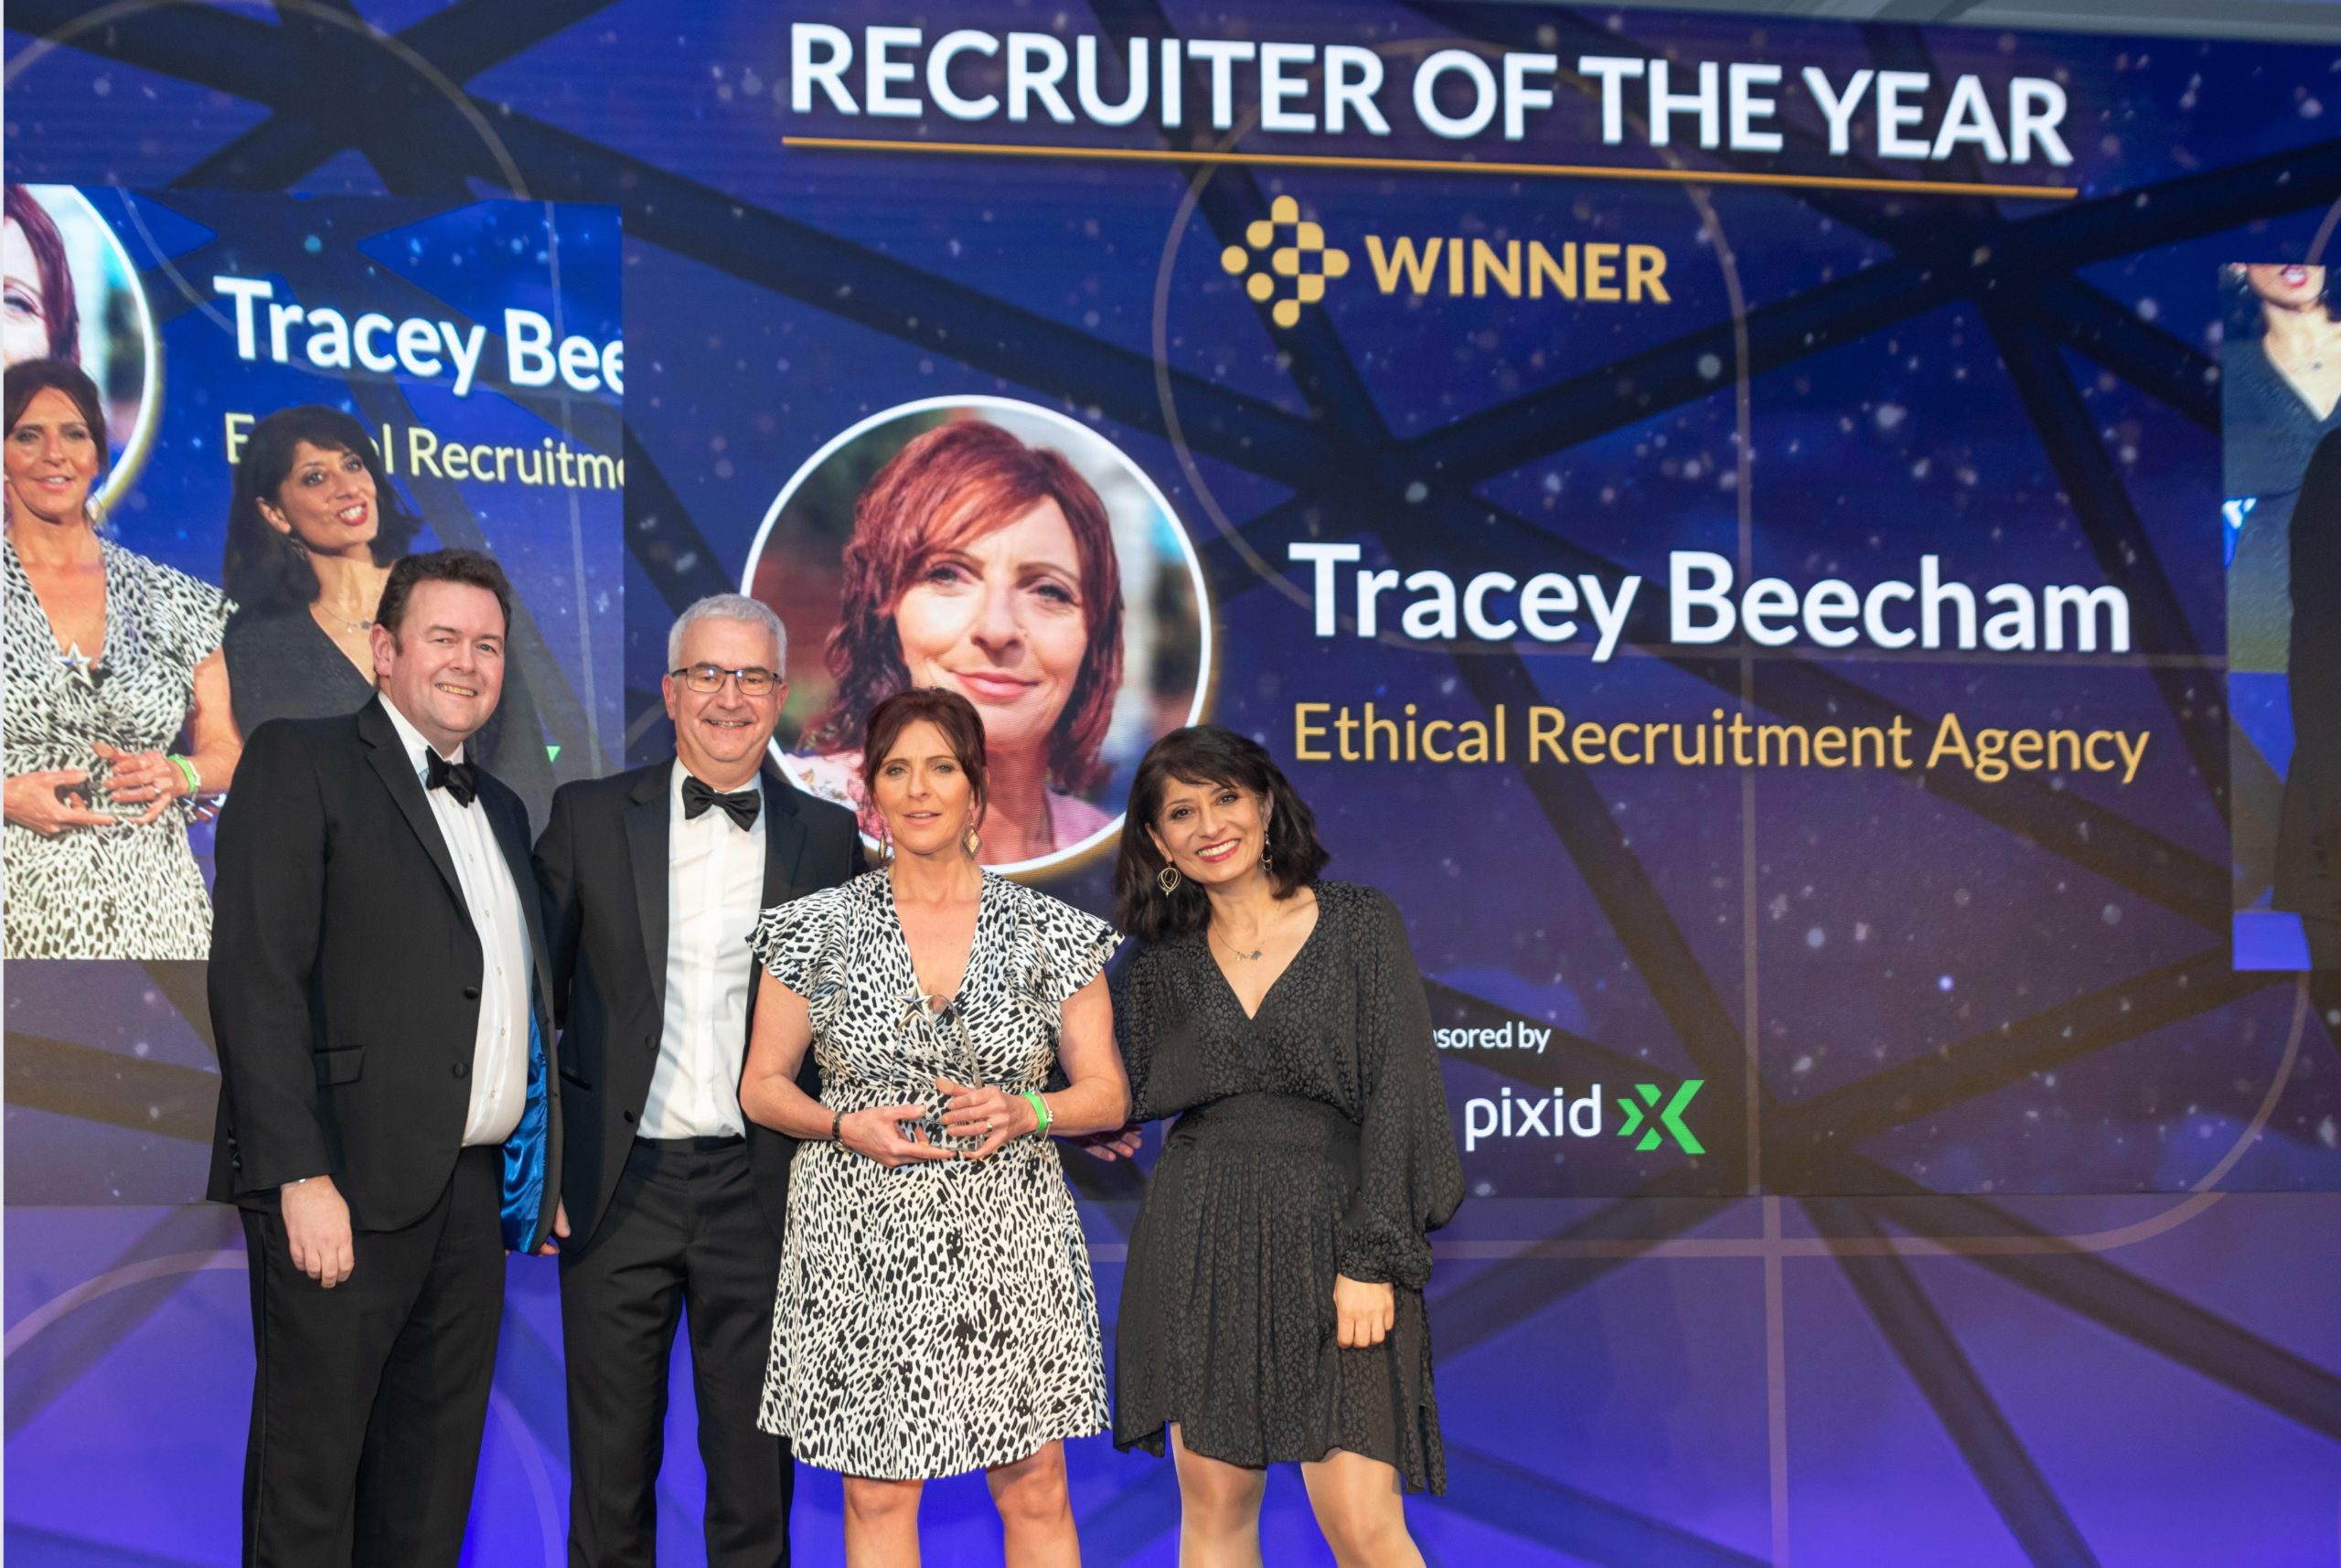 Étienne Colella presenting the 'Recruiter of the Year' Award to Tracey Beecham